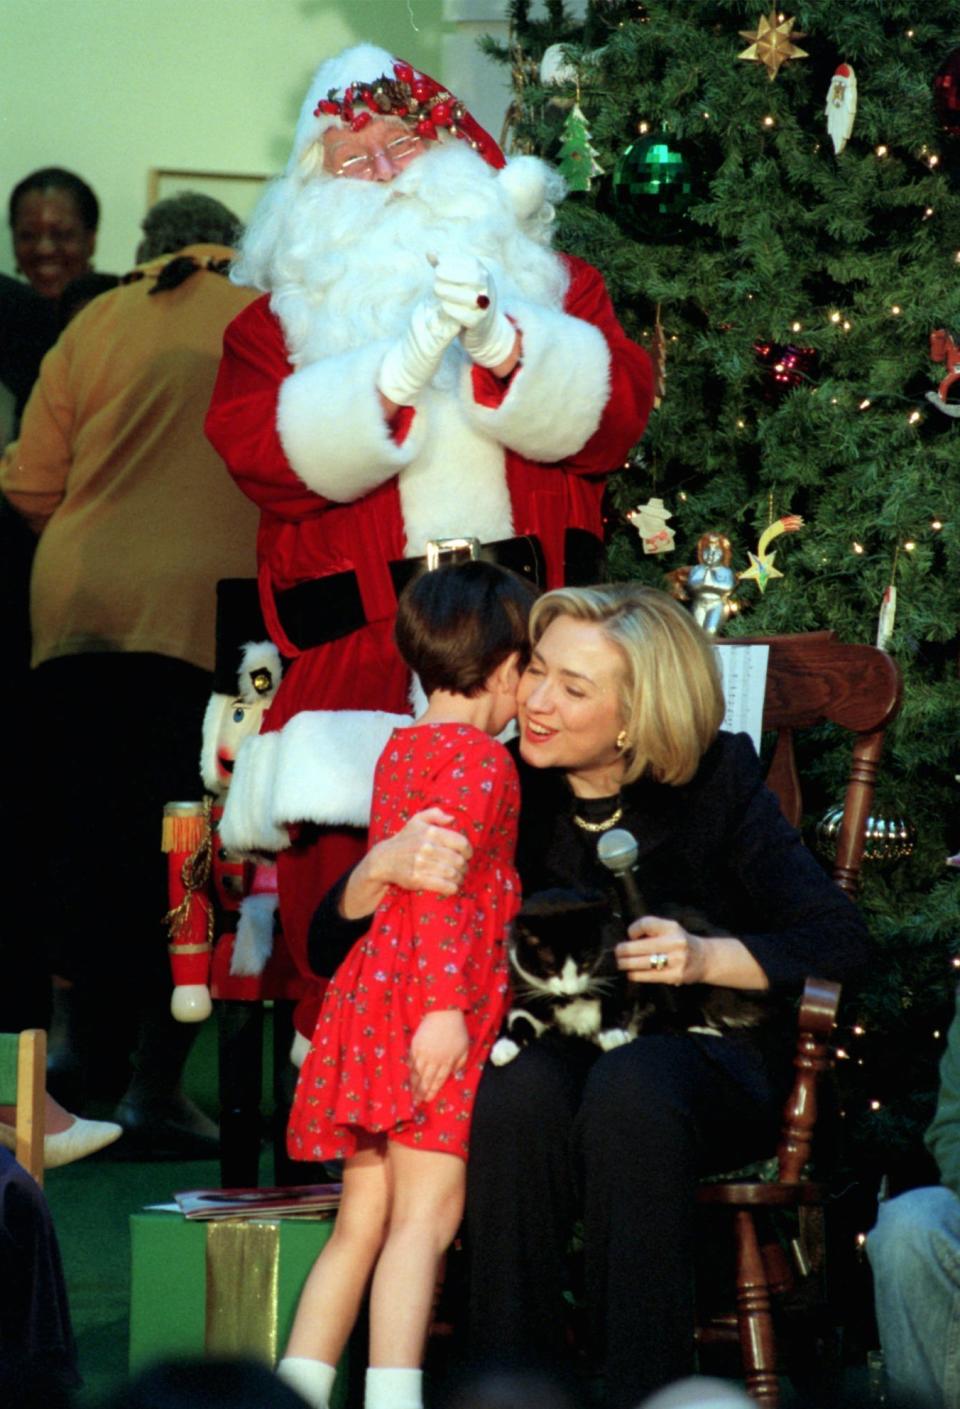 Santa Claus and Socks looks on as first lady Hillary Rodham Clinton hugs Katherine Meinhardt, 7, of Mechanicsville, Md. during Mrs. Clinton's annual visit to Children's National Medical Center in Washington Tuesday Dec. 16, 1997. (AP Photo/Dennis Cook)